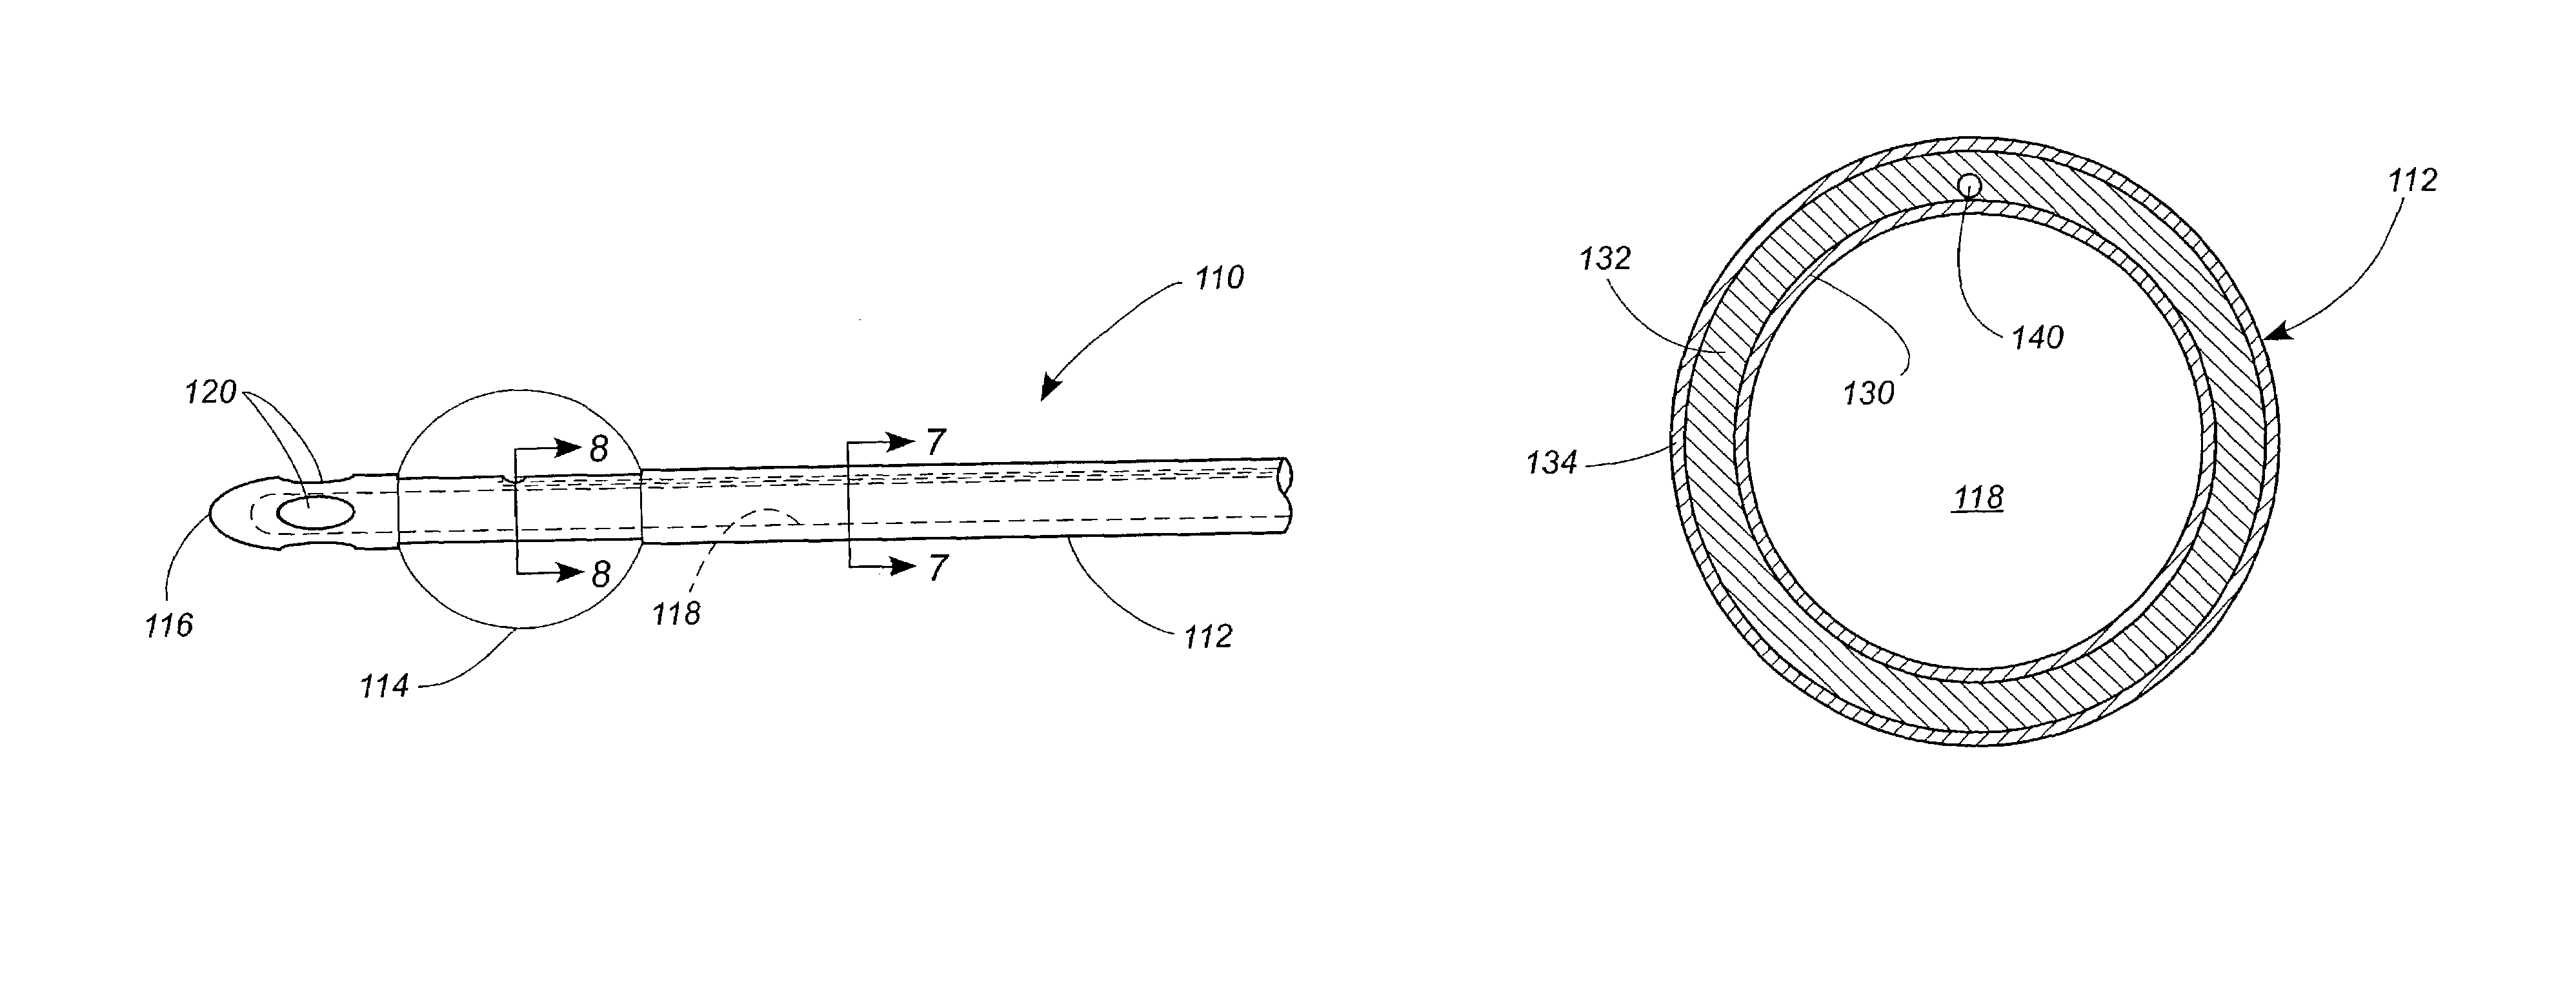 Balloon catheter with improved resistance to non-deflation